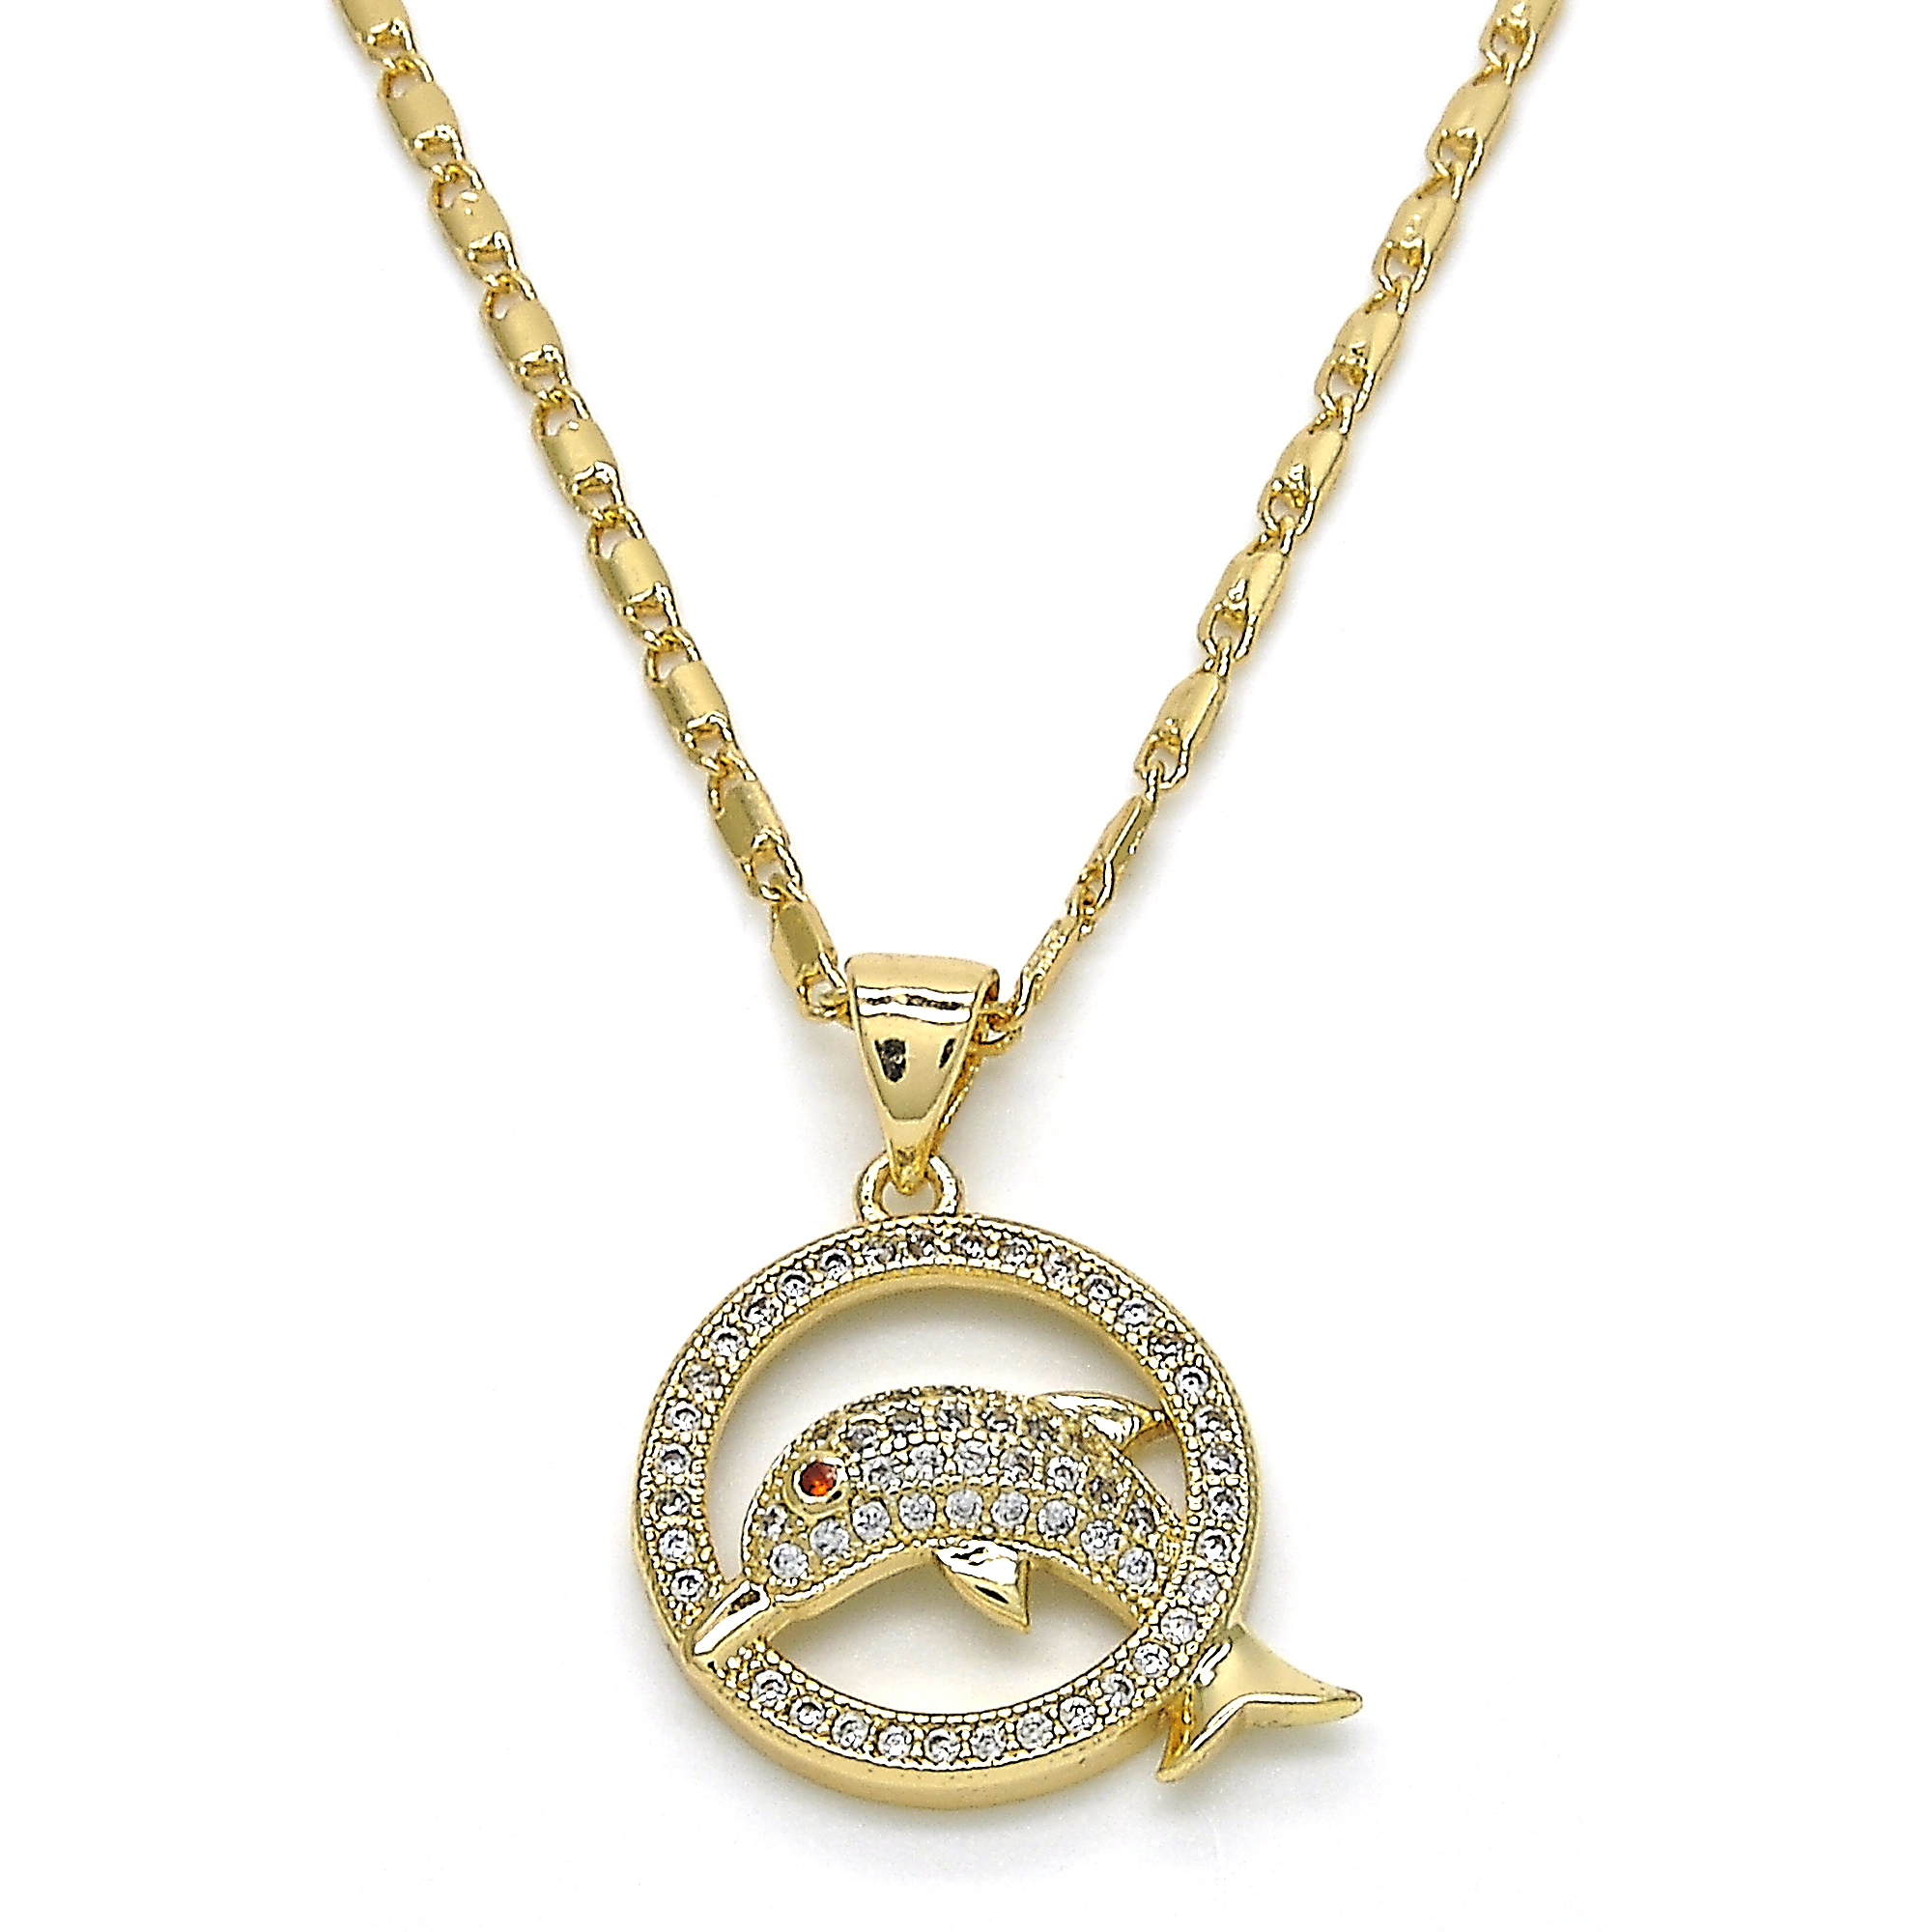 Gold Filled High Polish Finsh Fancy Necklace, Dolphin Design, With Garnet And White Micro Pave, Polished Finish, Golden Tone